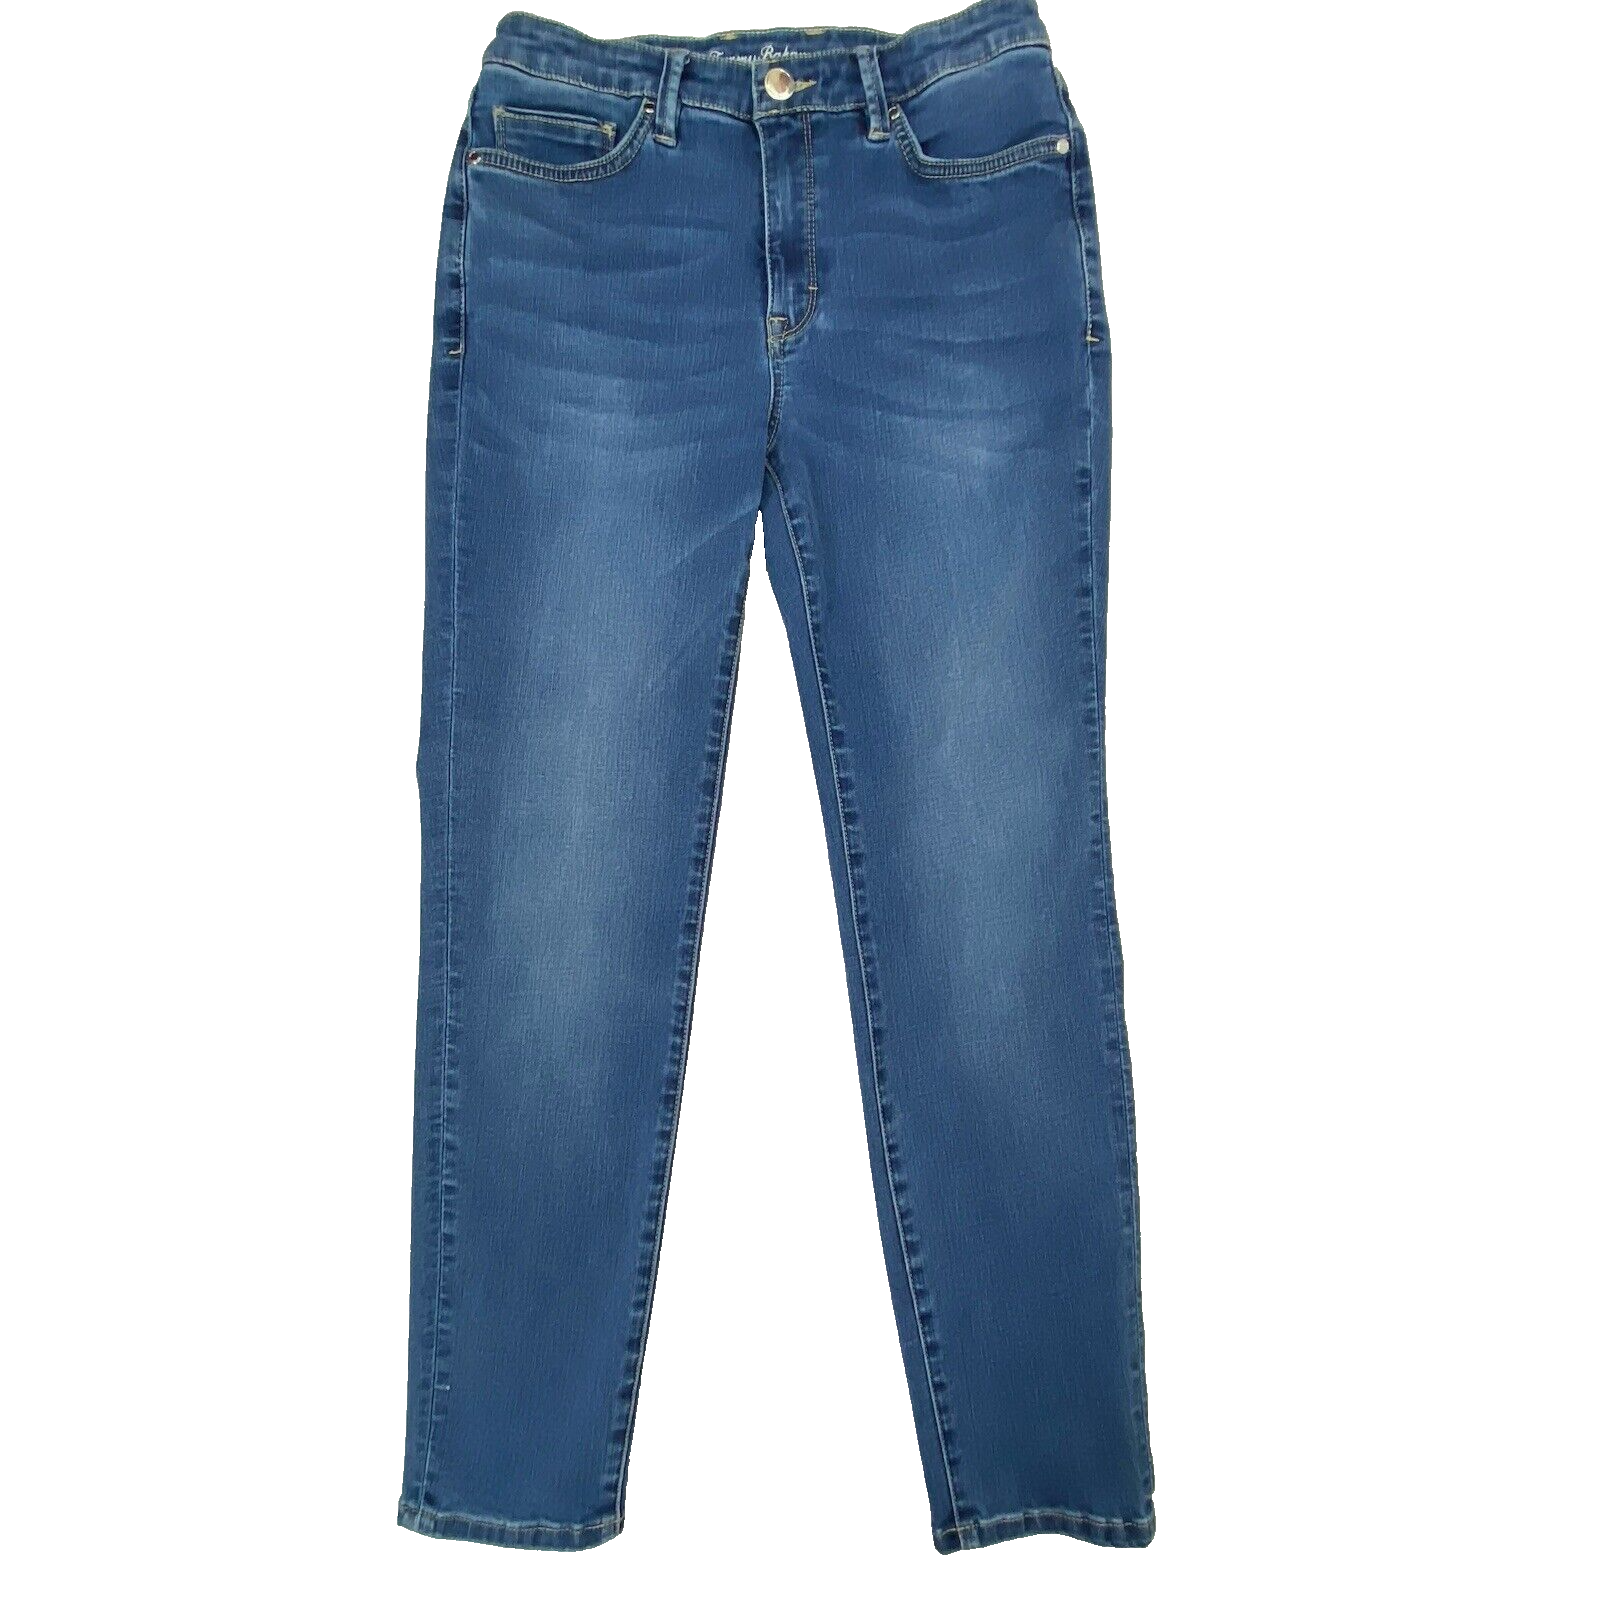 Primary image for Tommy Bahama Boracay Indigo High Rise Ankle Blue Jeans Womens size 4 x 28 in